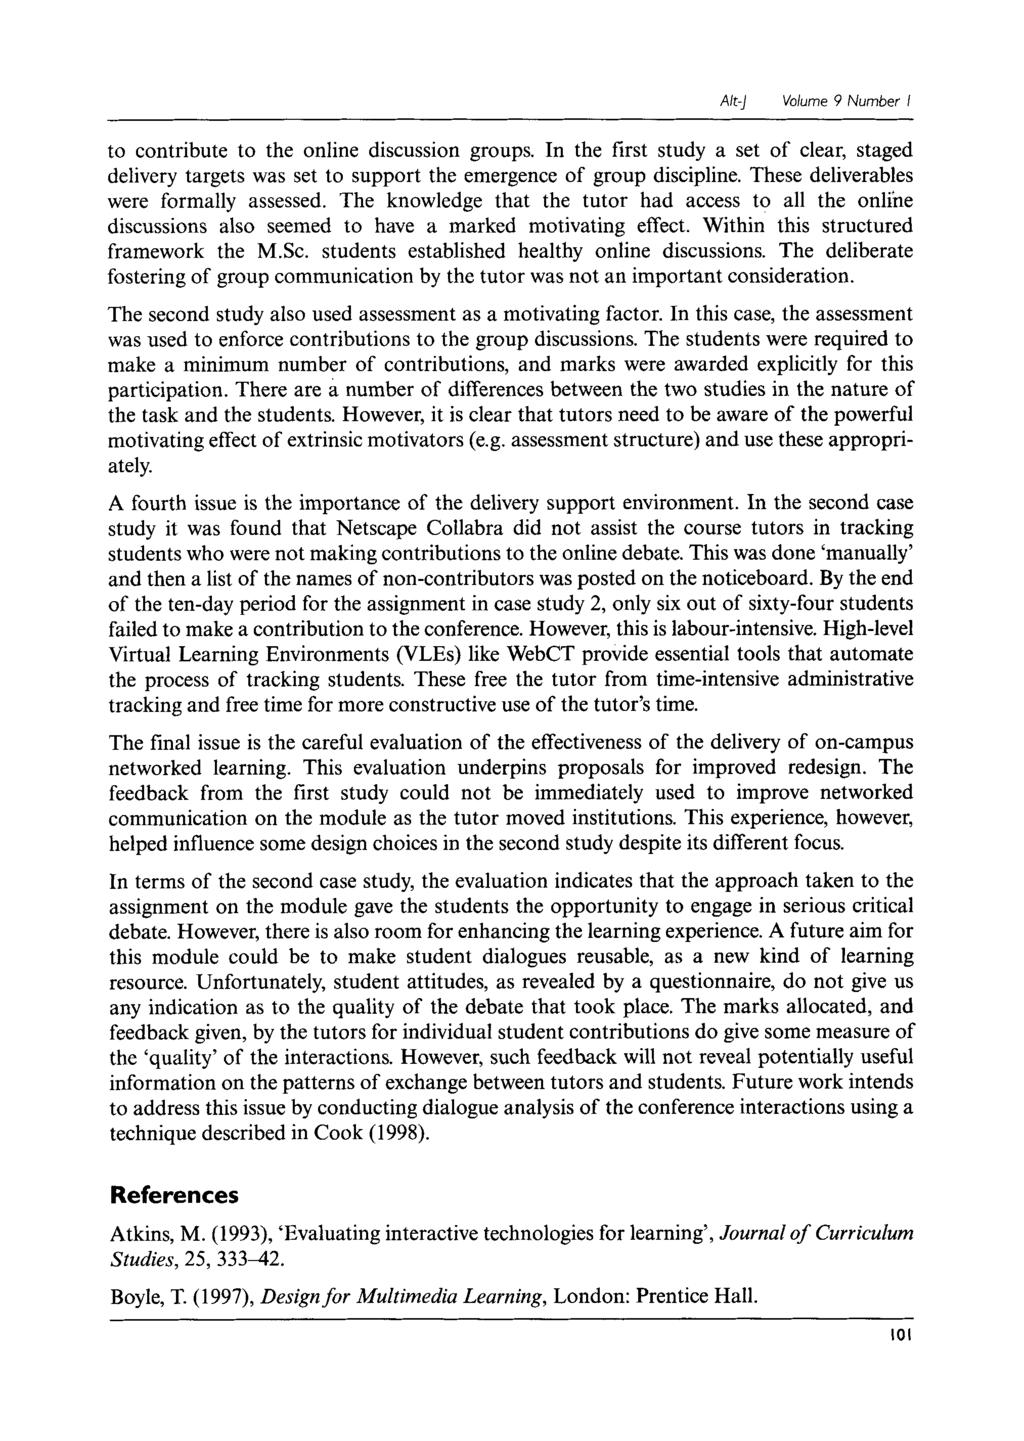 Ale-] Volume 9 Number I to contribute to the online discussion groups. In the first study a set of clear, staged delivery targets was set to support the emergence of group discipline.